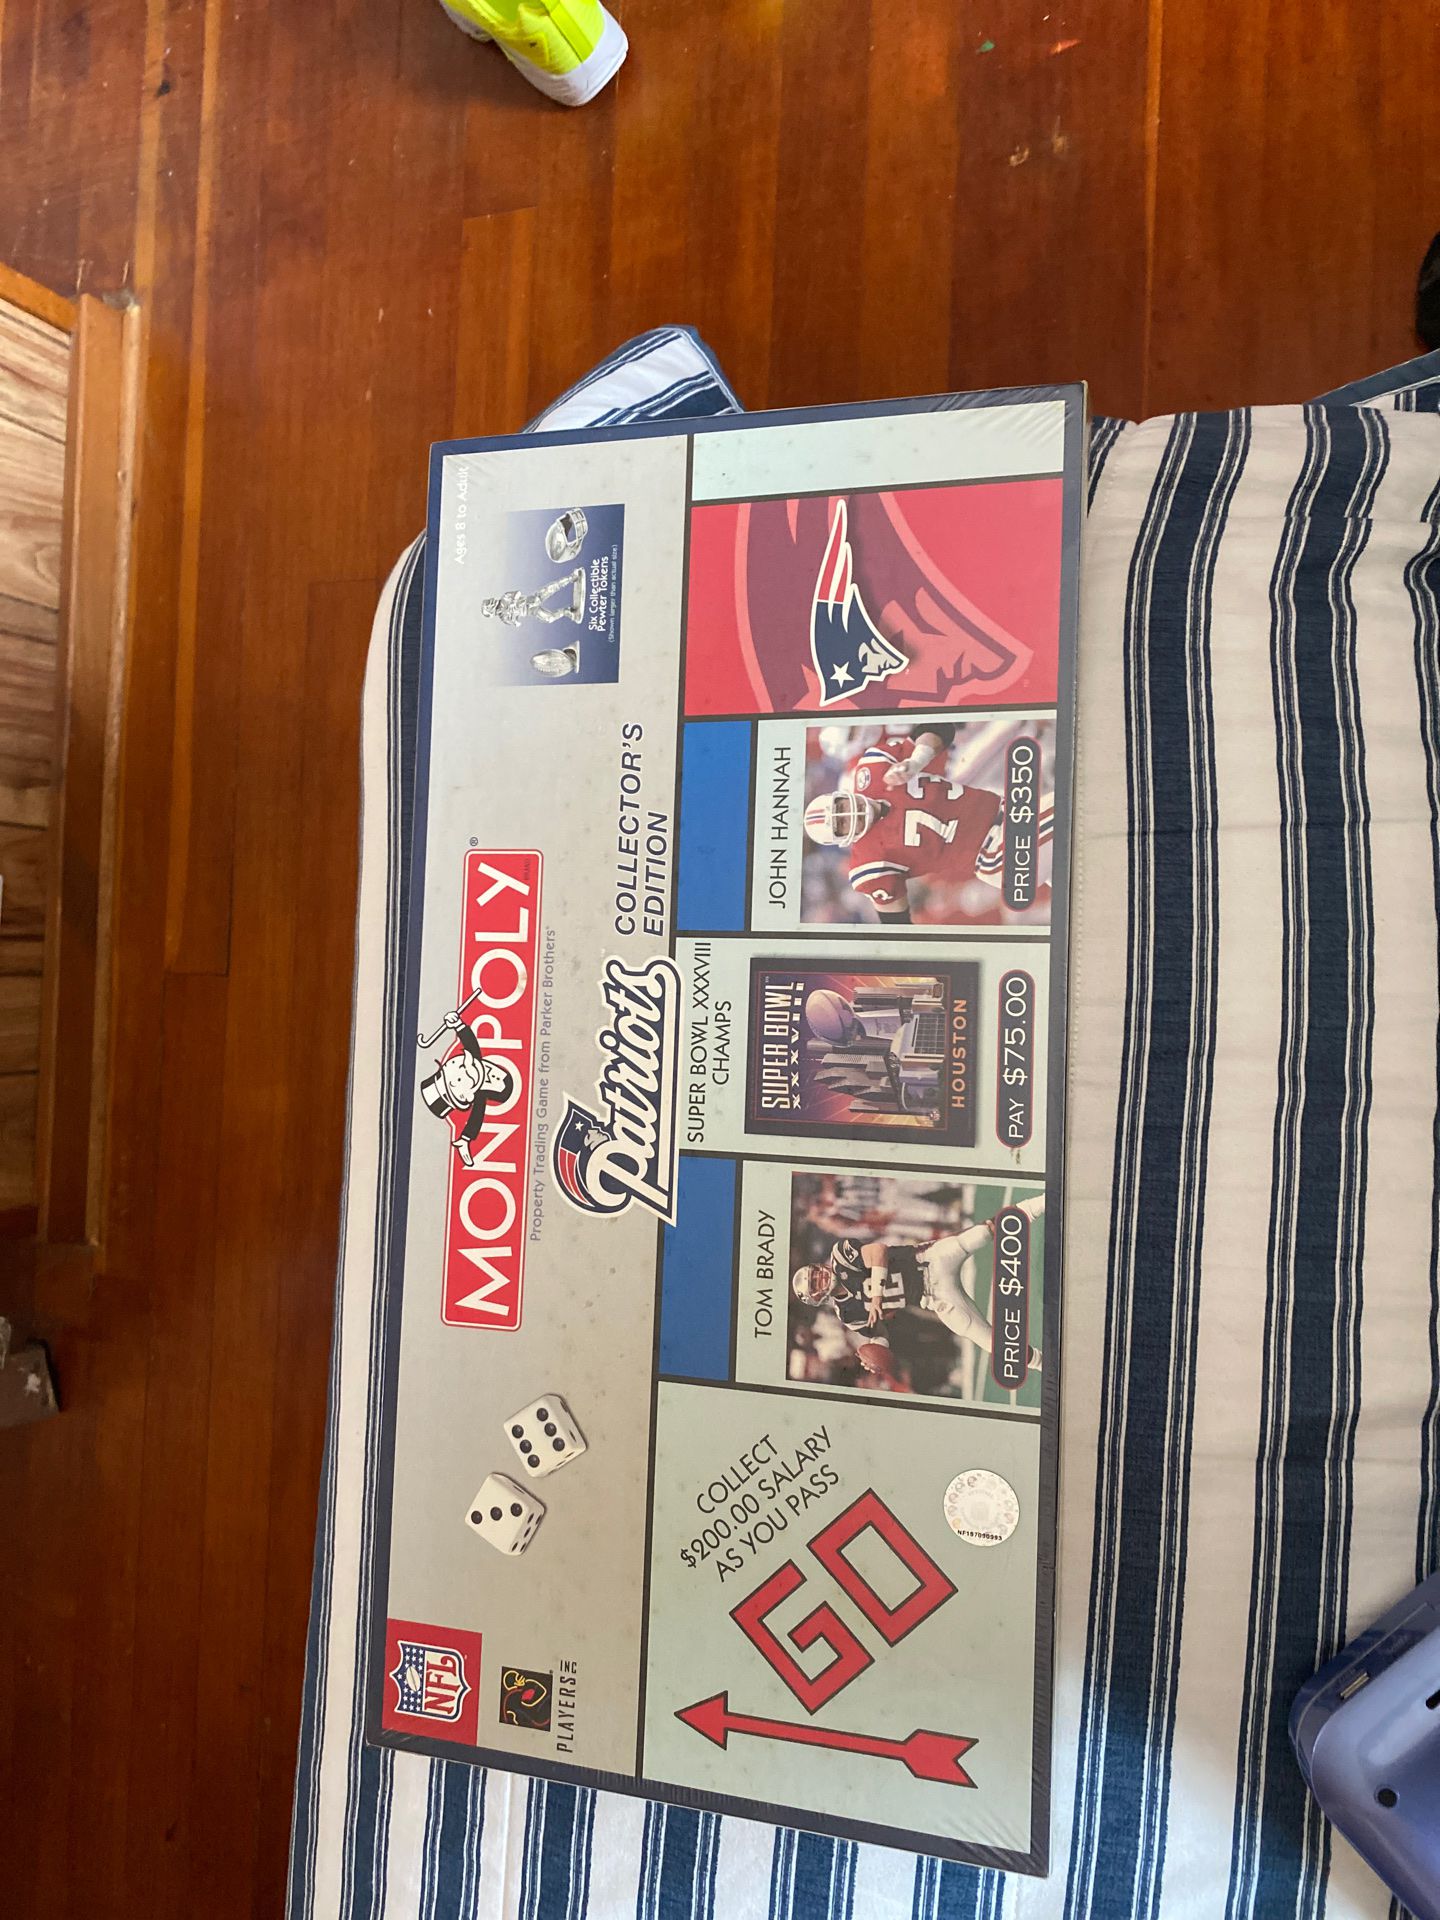 Monopoly New England Patriots edition New in plastic